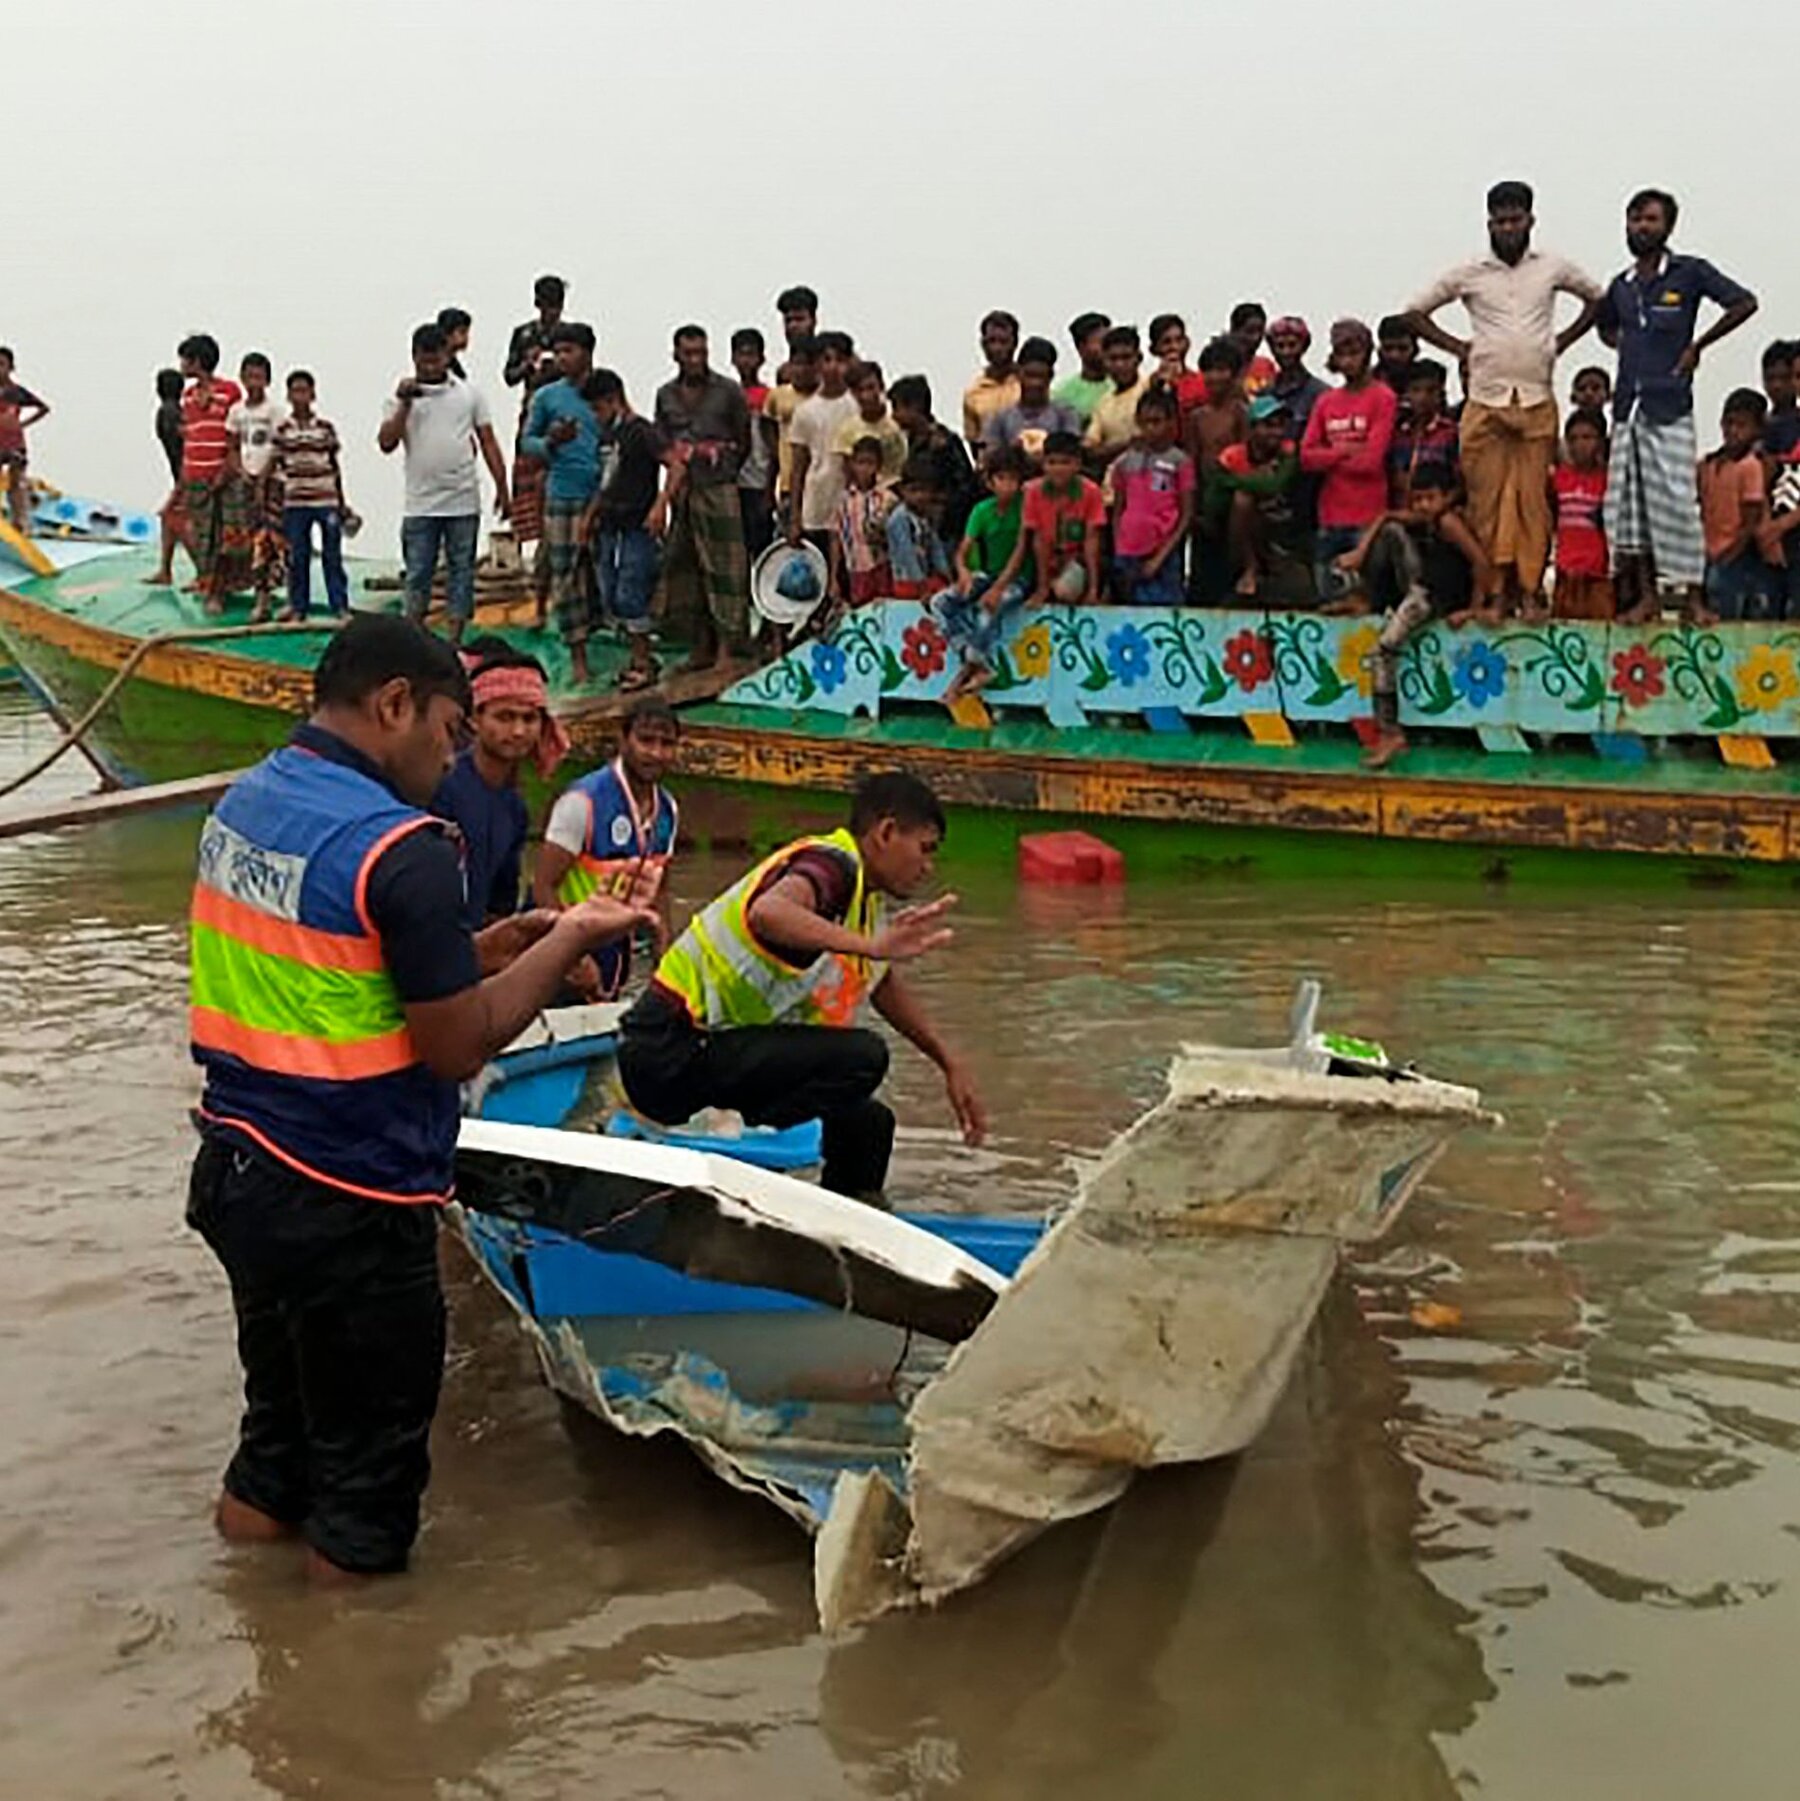 26 Killed in Bangladesh Boat Accident